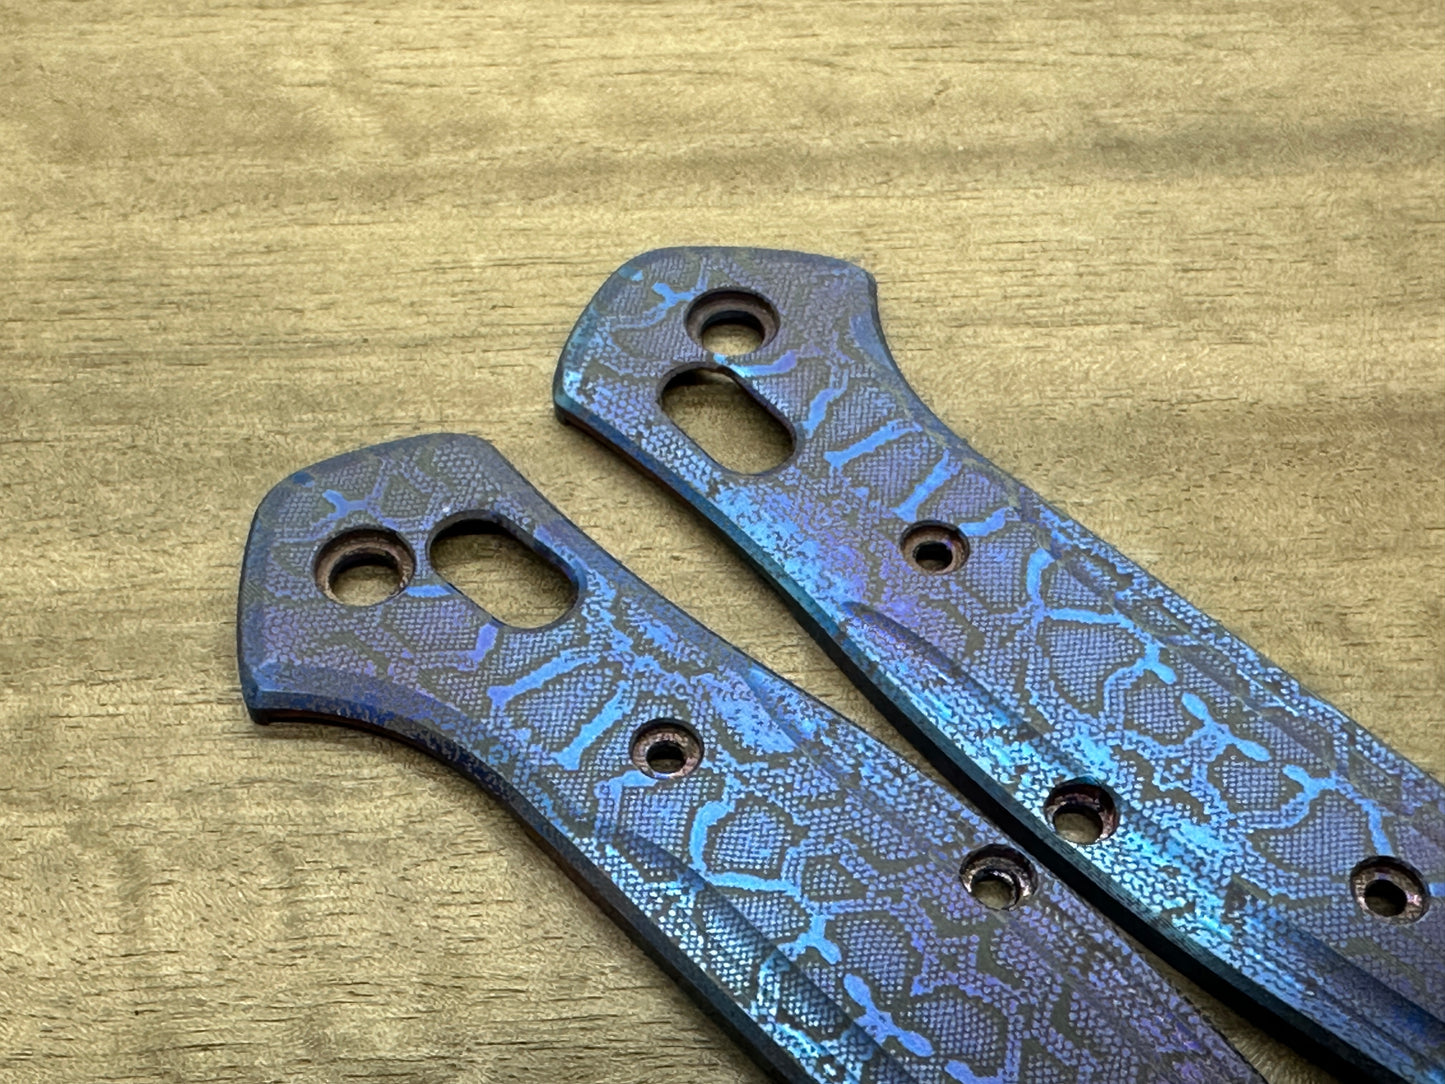 Flamed REPTILIAN engraved Titanium Scales for Benchmade 940 Osborne